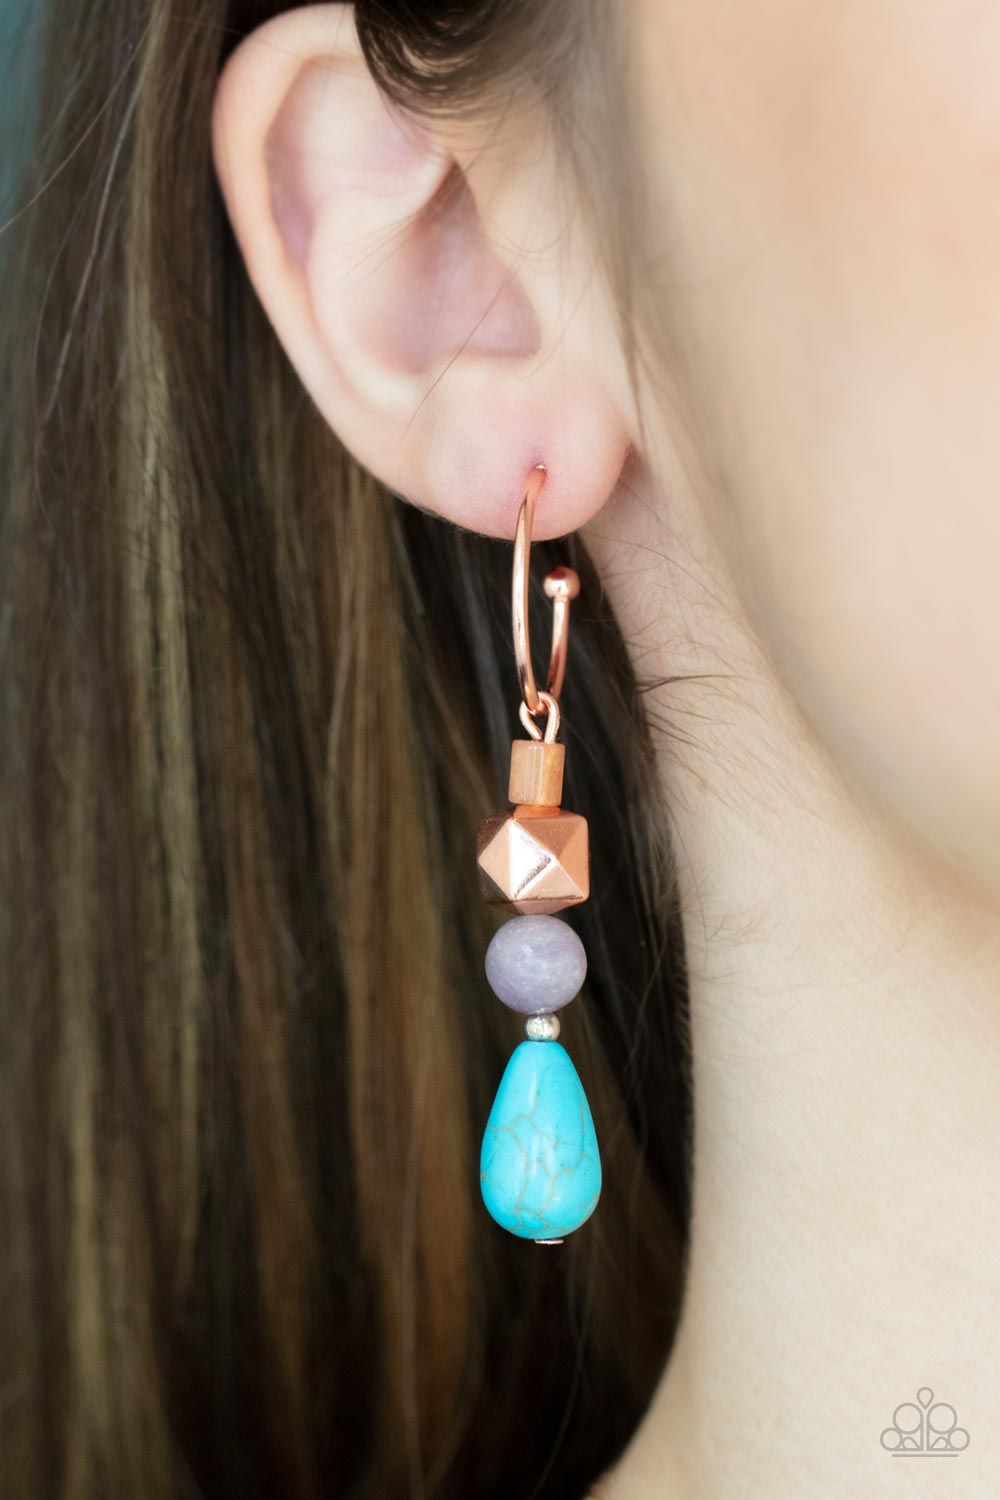 Boulevard Stroll - Copper Faceted Hoop Earrings a charismatic collection of glassy, amethyst, and turquoise stone beads, accented with a shiny copper faceted square bead, are threaded onto a pin which dangles from a dainty shiny copper hoop. Earring attaches to a standard post fitting. Hoop measures approximately 3/4" in diameter.  Sold as one pair of hoop earrings.  Paparazzi Jewelry is lead and nickel free so it's perfect for sensitive skin too!